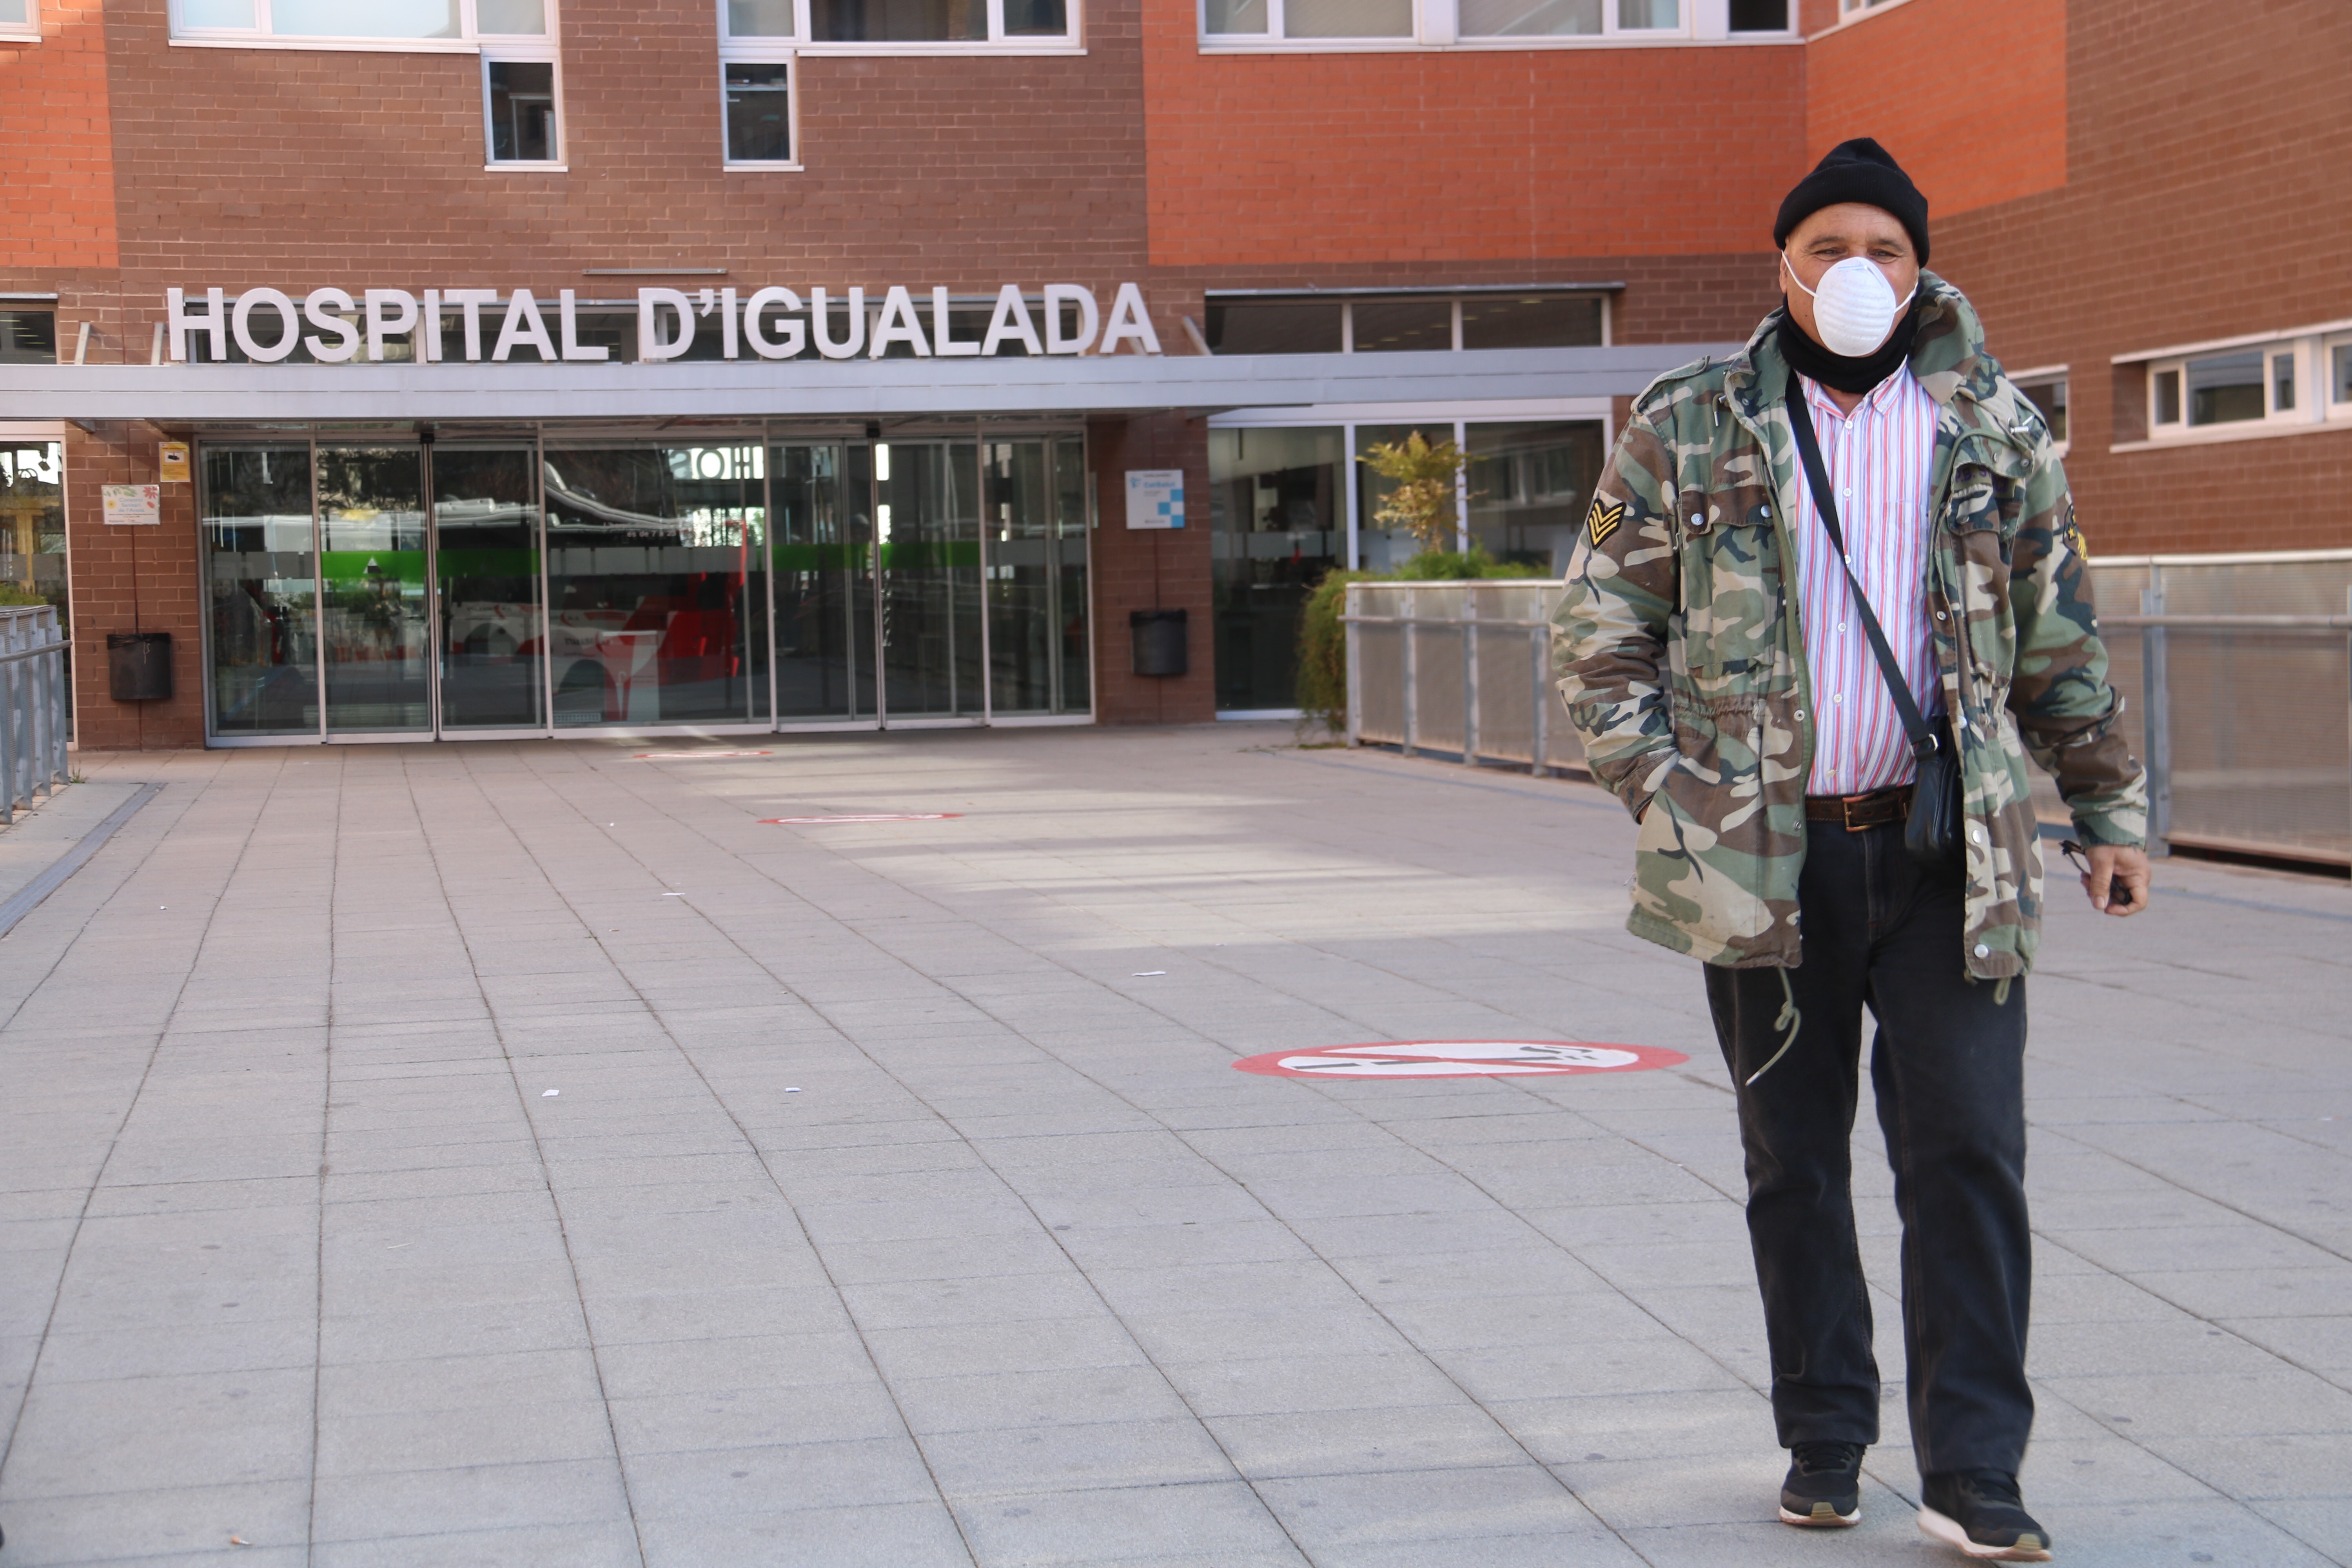 A man leaves Igualada Hospital wearing a mask, March 12, 2020 (by Nia Escolà)